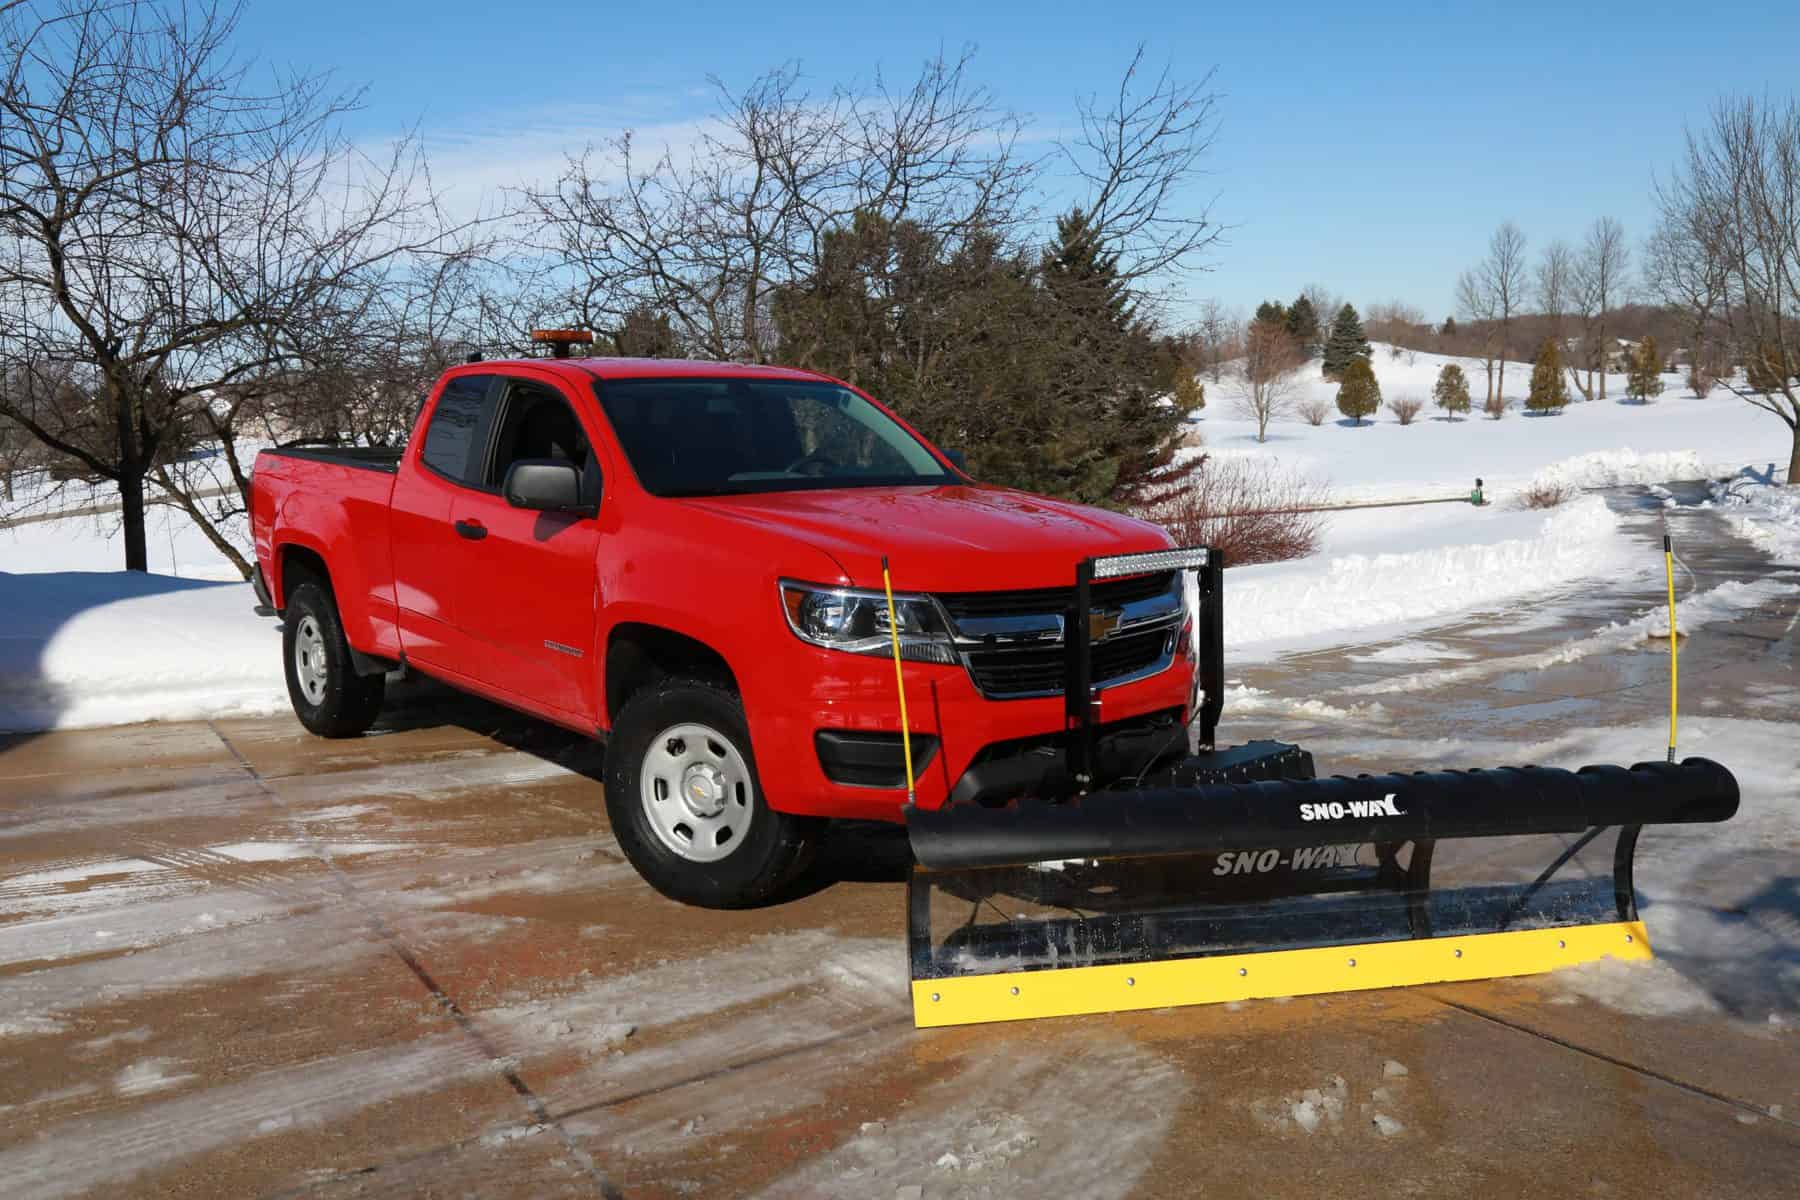 Sno-Way 22 Driveway Snow Plow on a red Chevy Colorado Truck